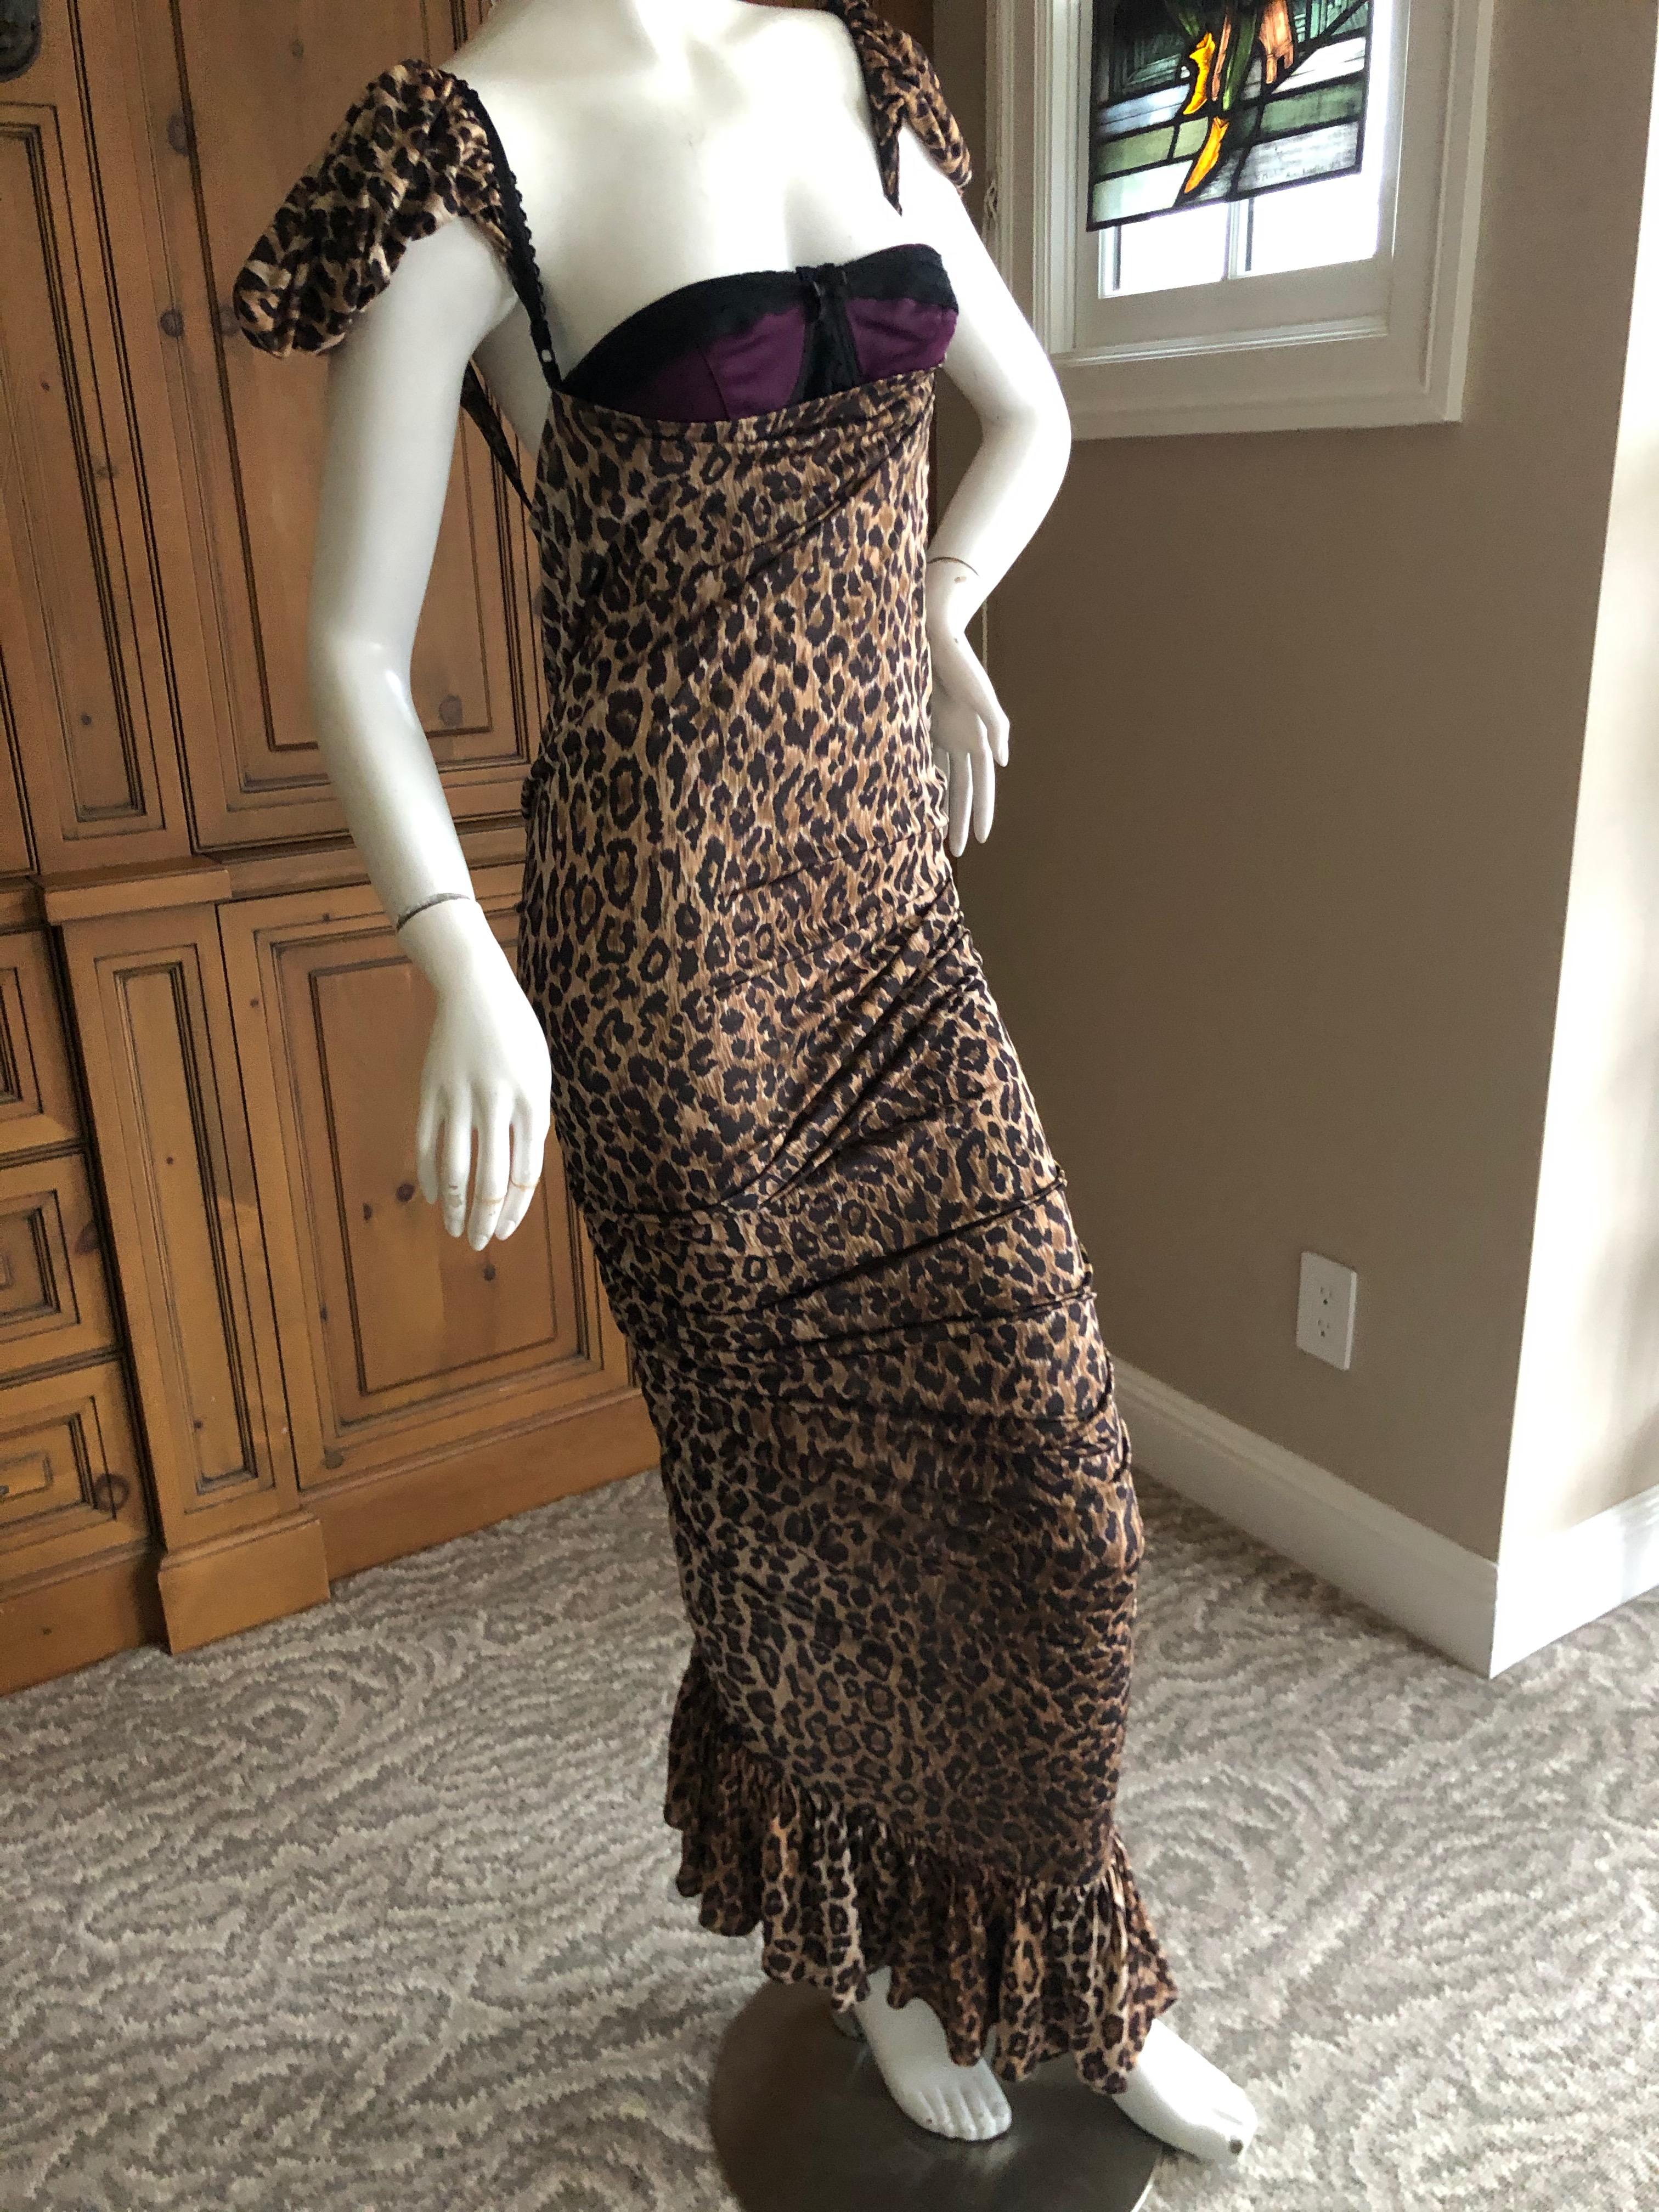 Dolce & Gabbana for D&G Vintage Leopard Print Cocktail Dress with Attached Bra For Sale 1